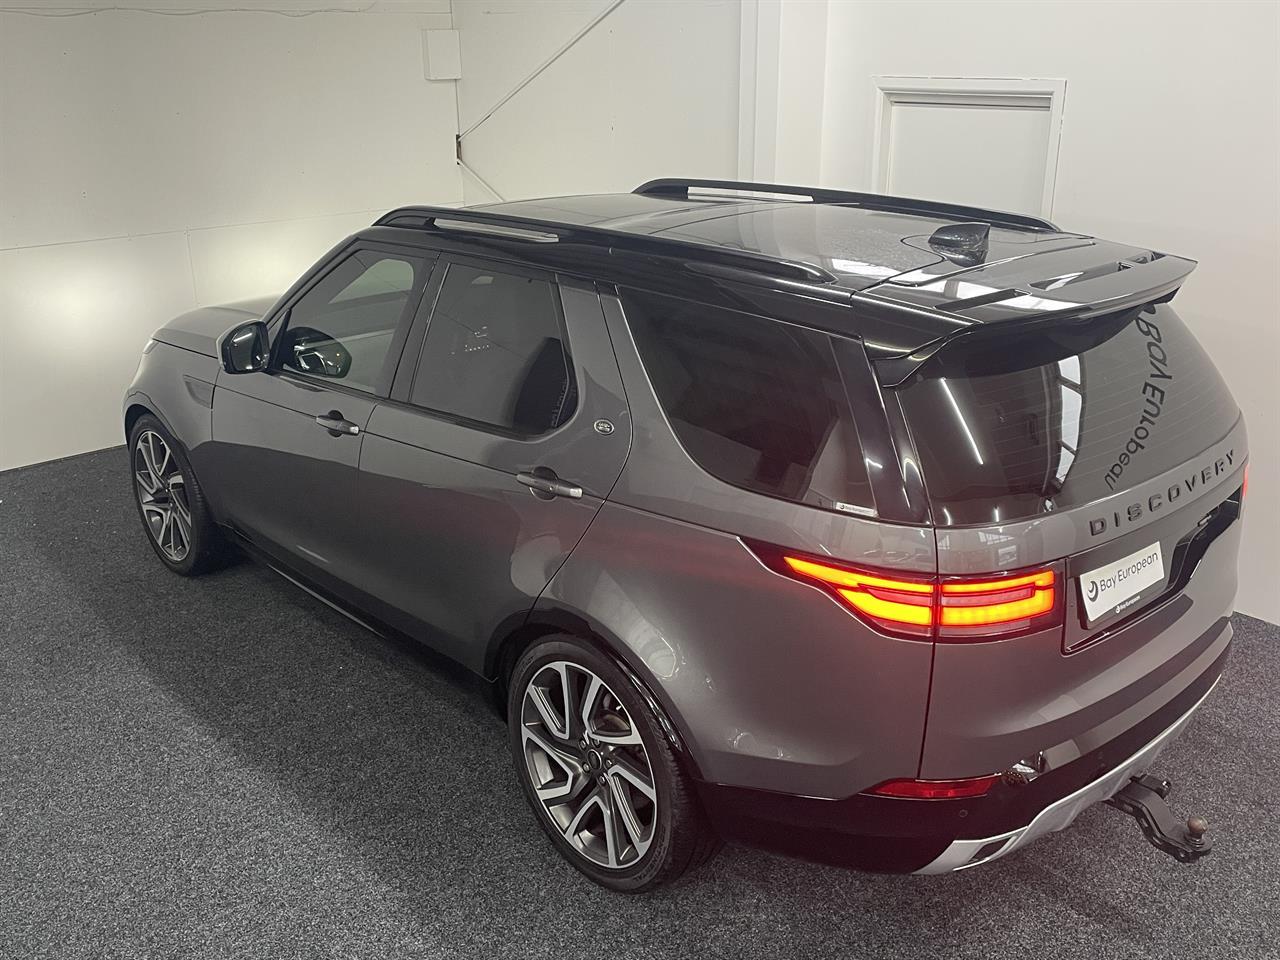 2018 Land Rover Discovery TD6 HSE Luxury 3.0D 7 Seater image 13